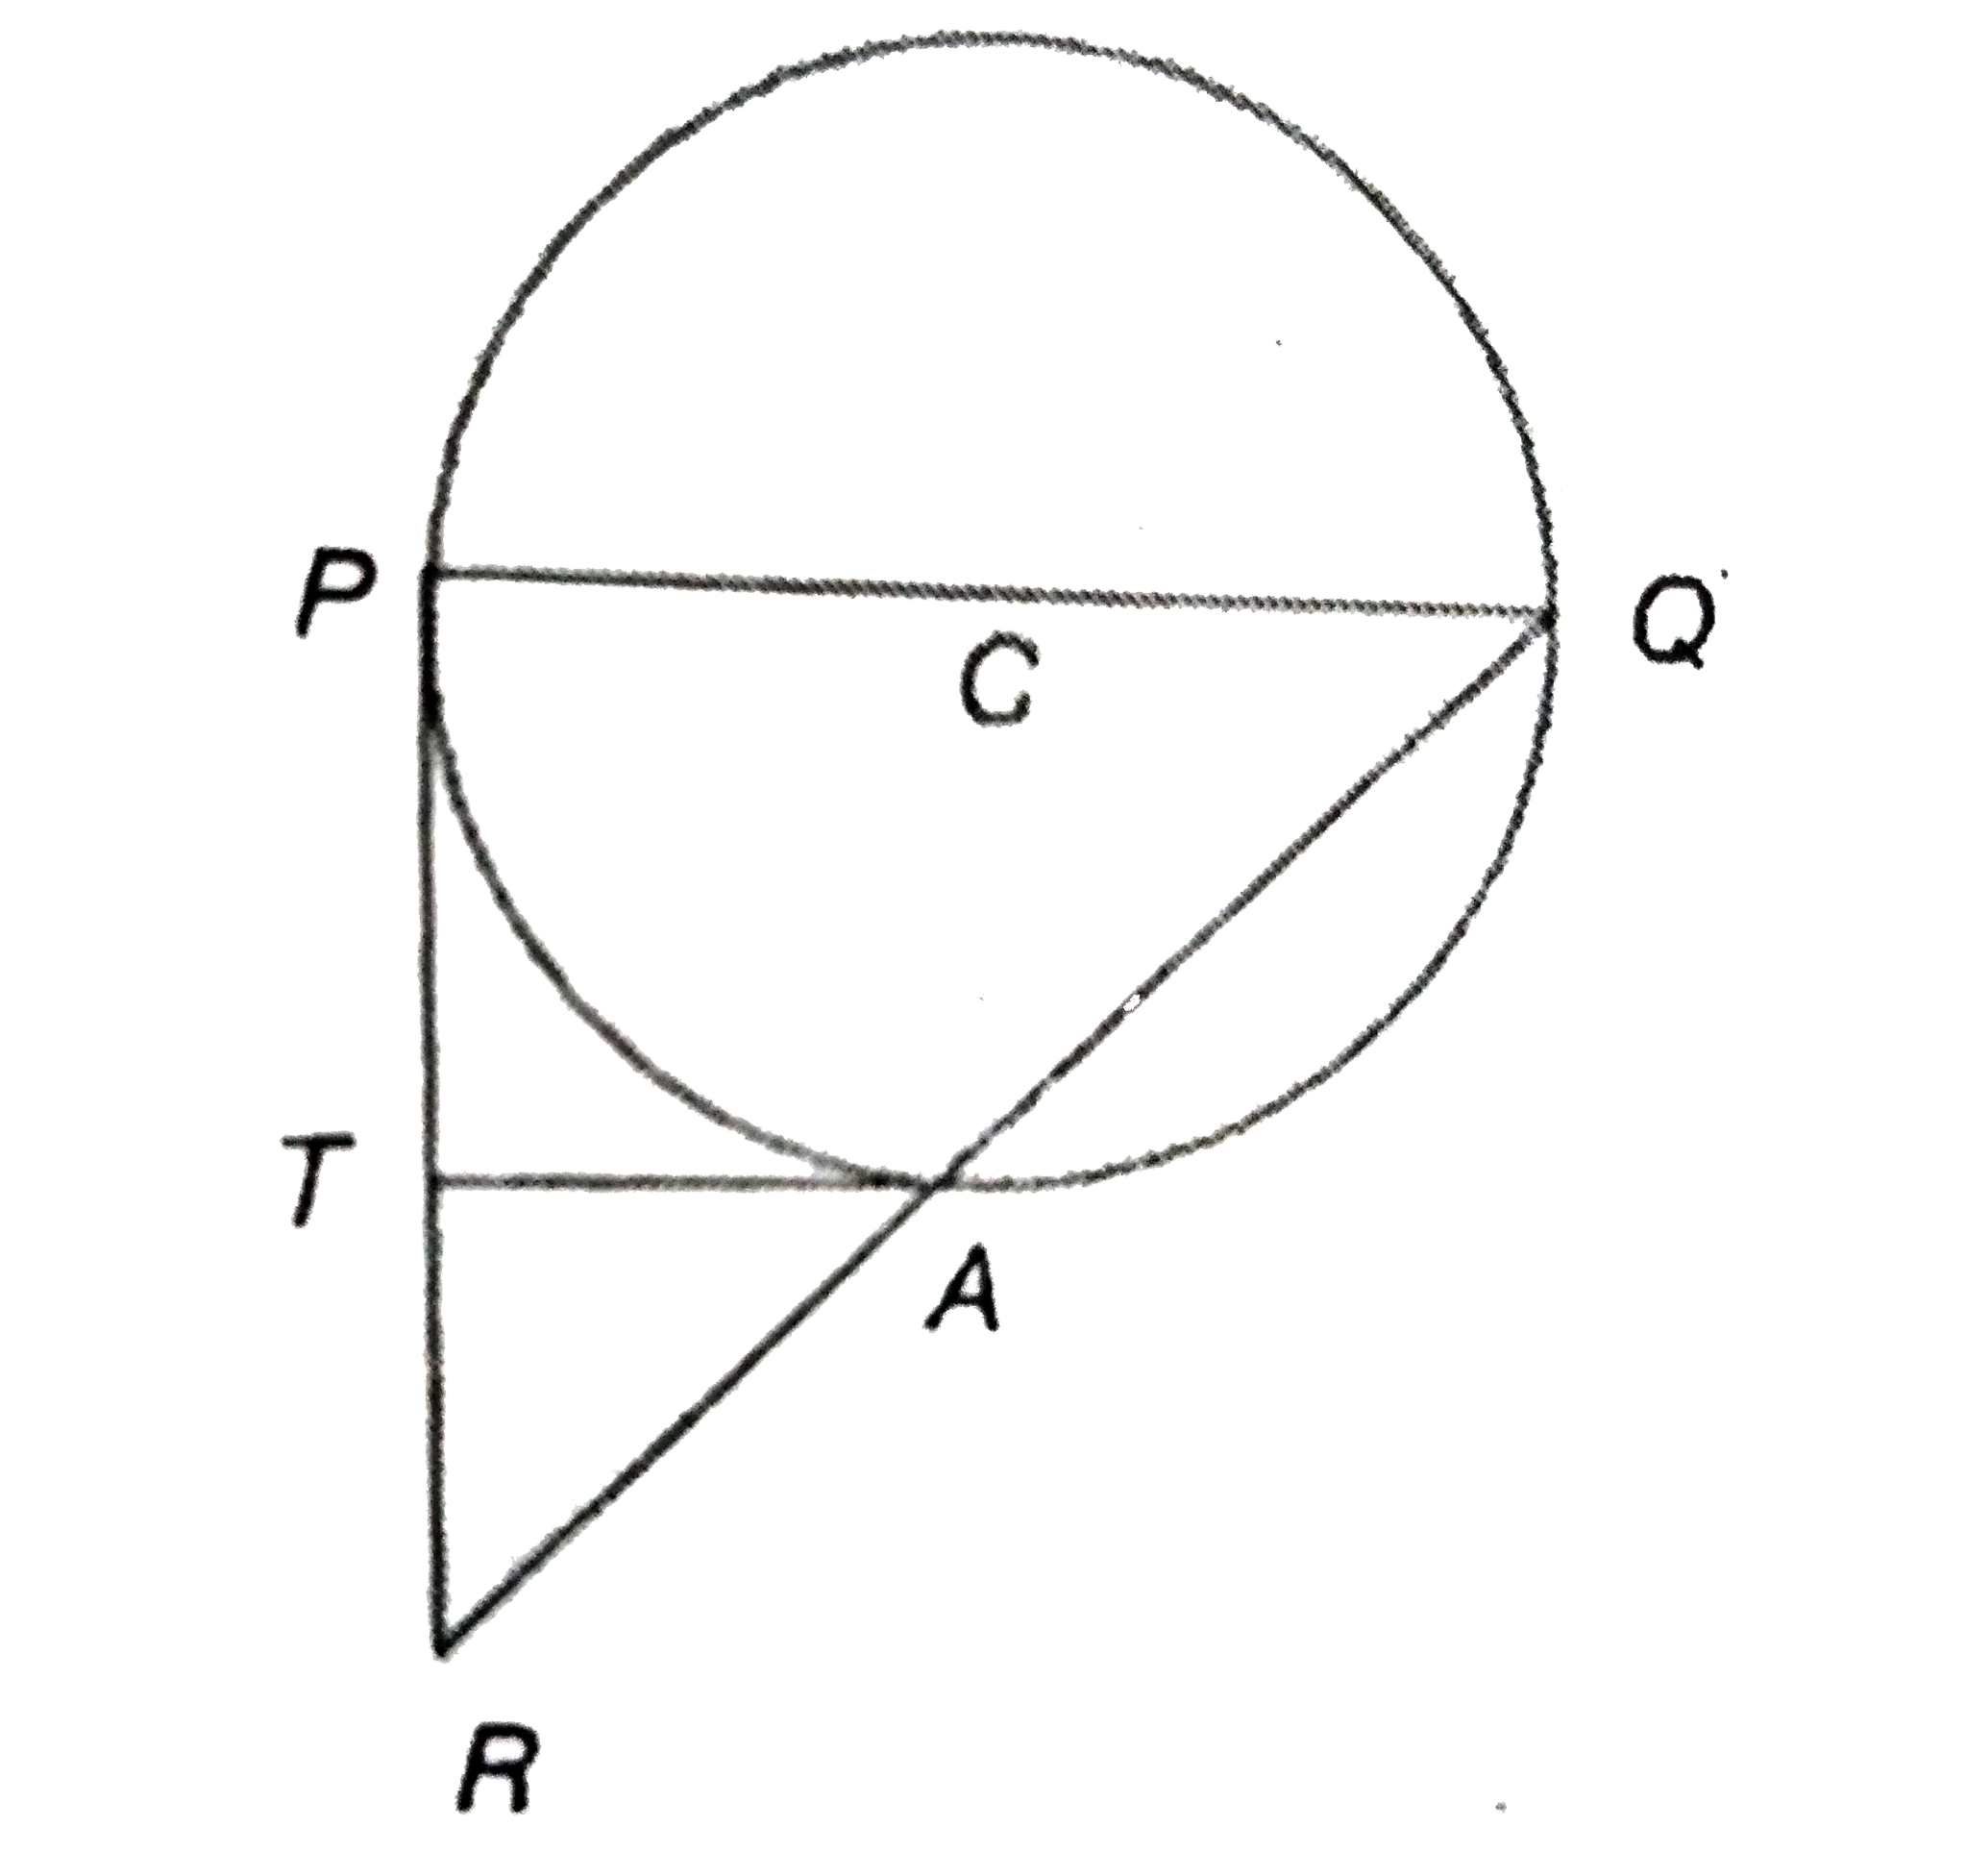 In the following figure,PQ is the diameter of the circle with radius 5 cm. if AT is the tangent and equal to the radius of the circle, then find the lenth of AR.